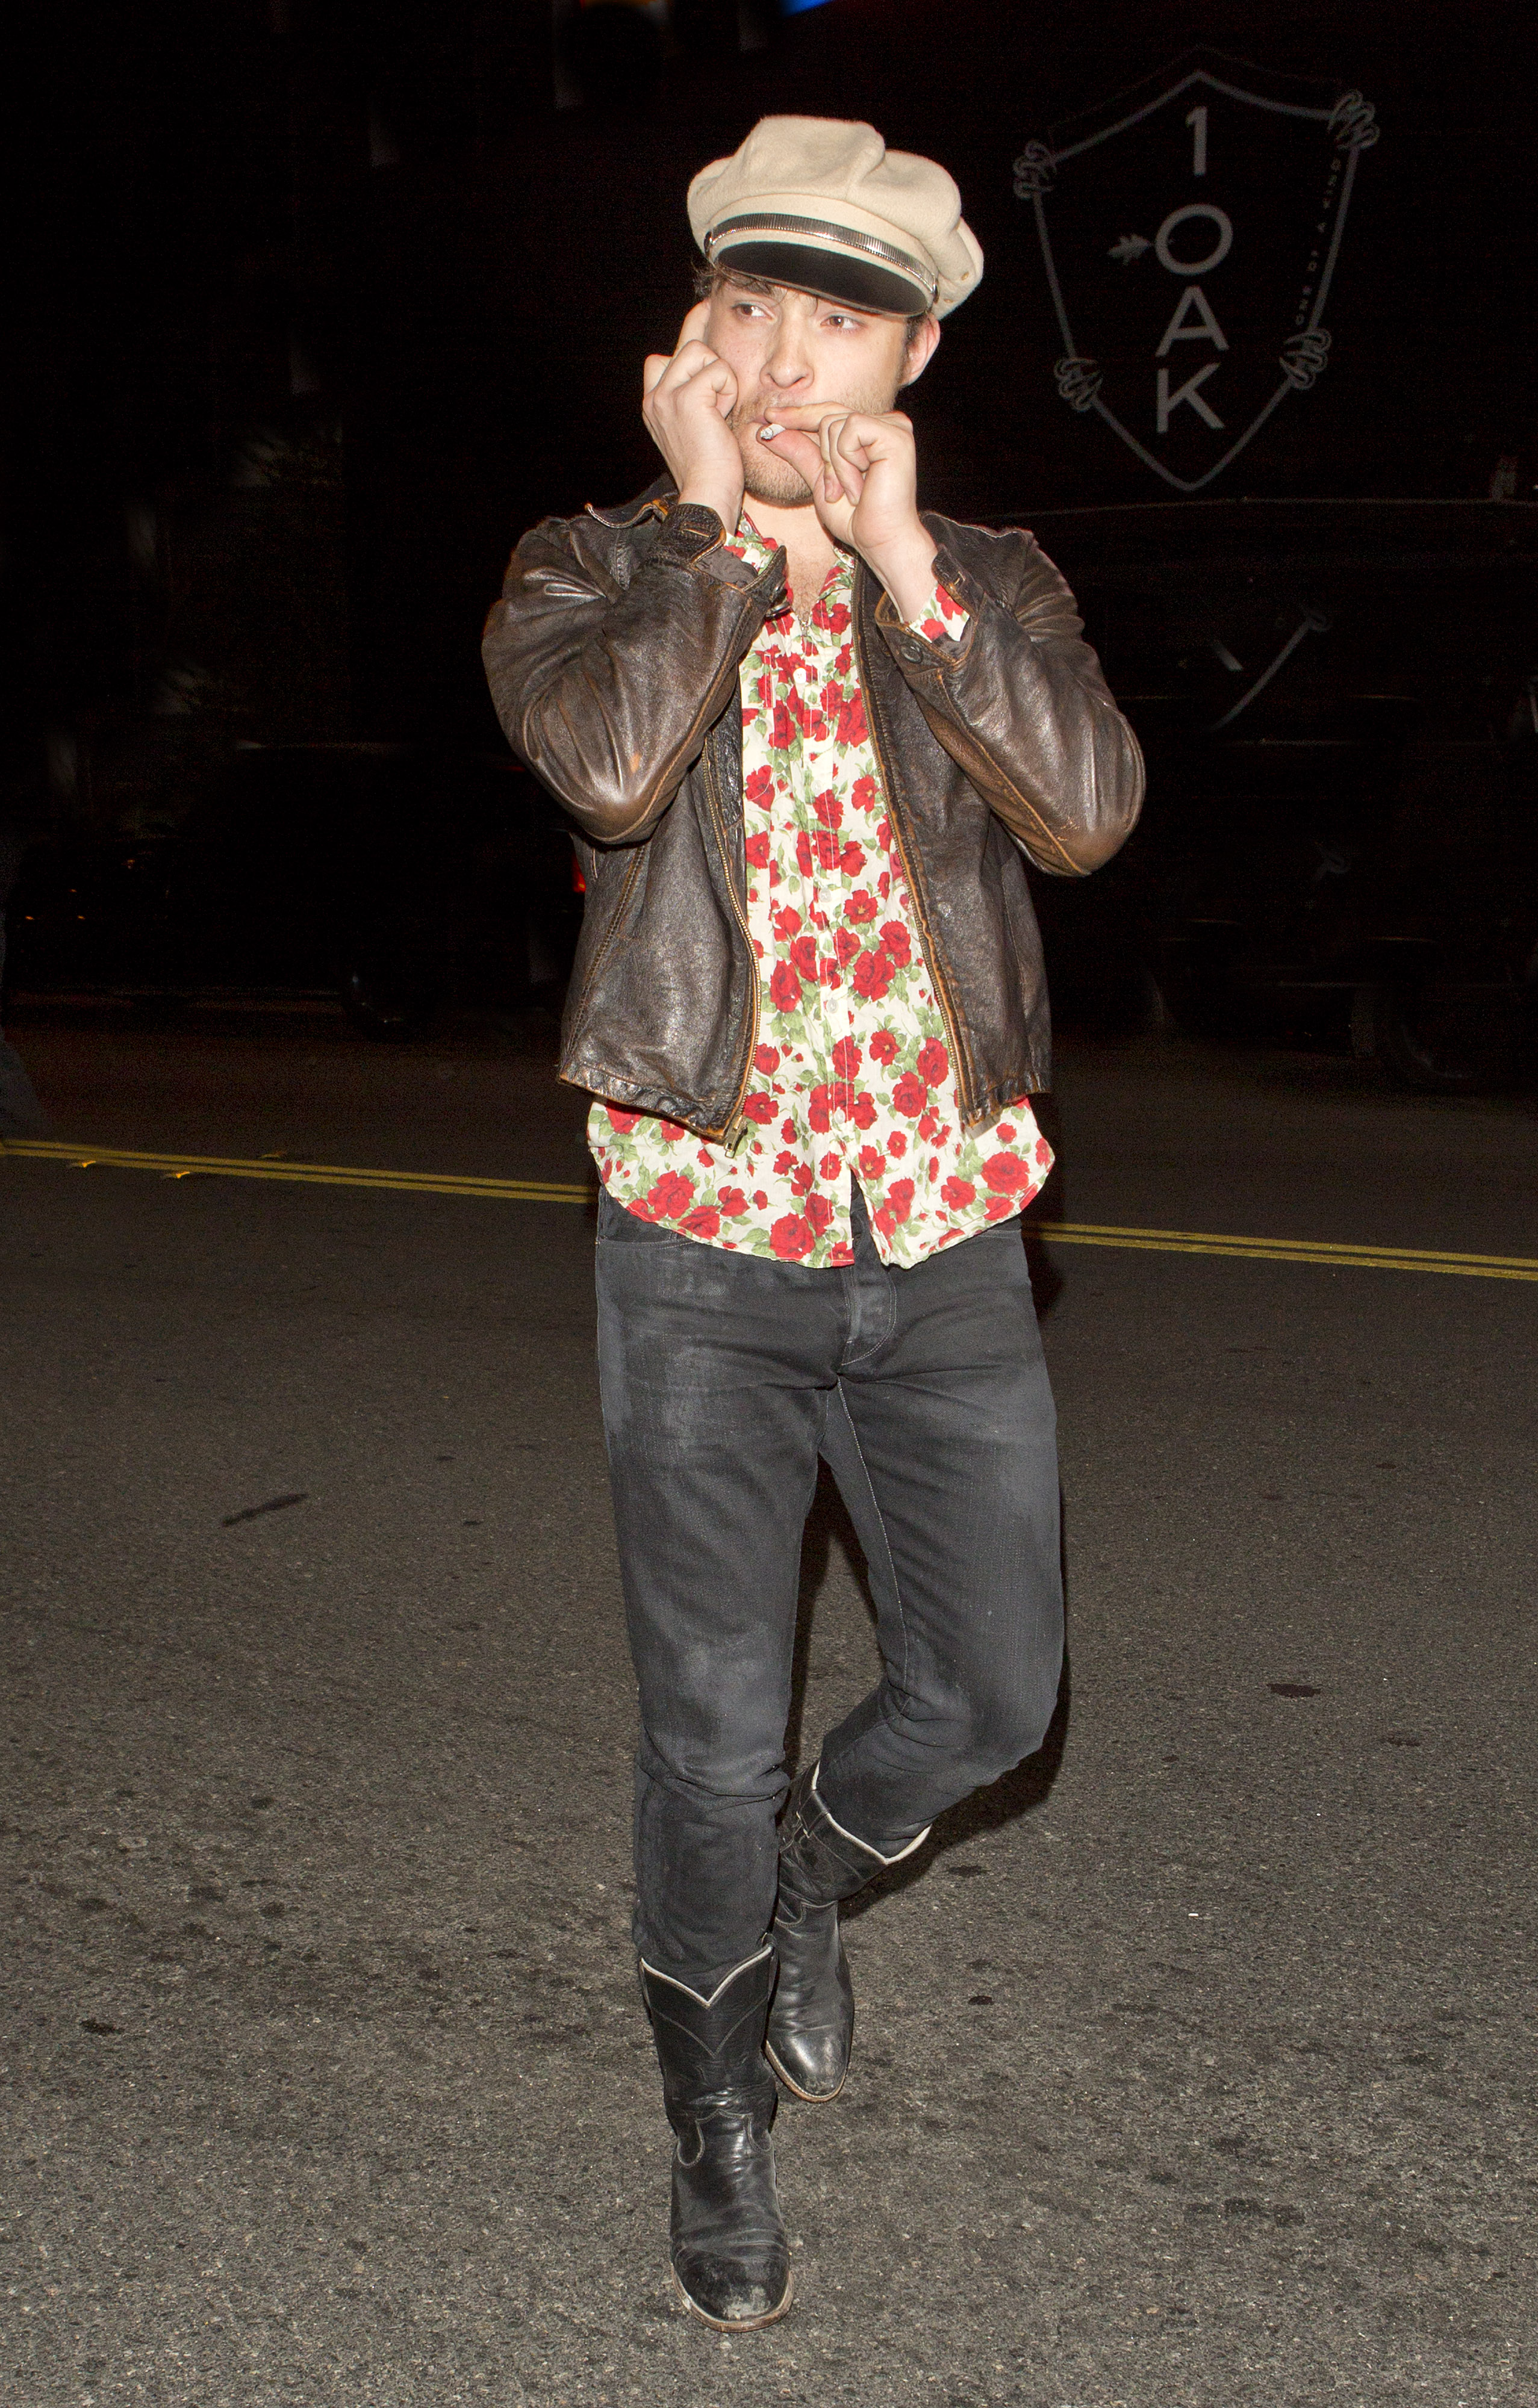 British Actor Ed Westwick form 'Gossip Girl' was seen as he puffed on a cigarette leaving '1 Oak' Night Club in West Hollywood, CA